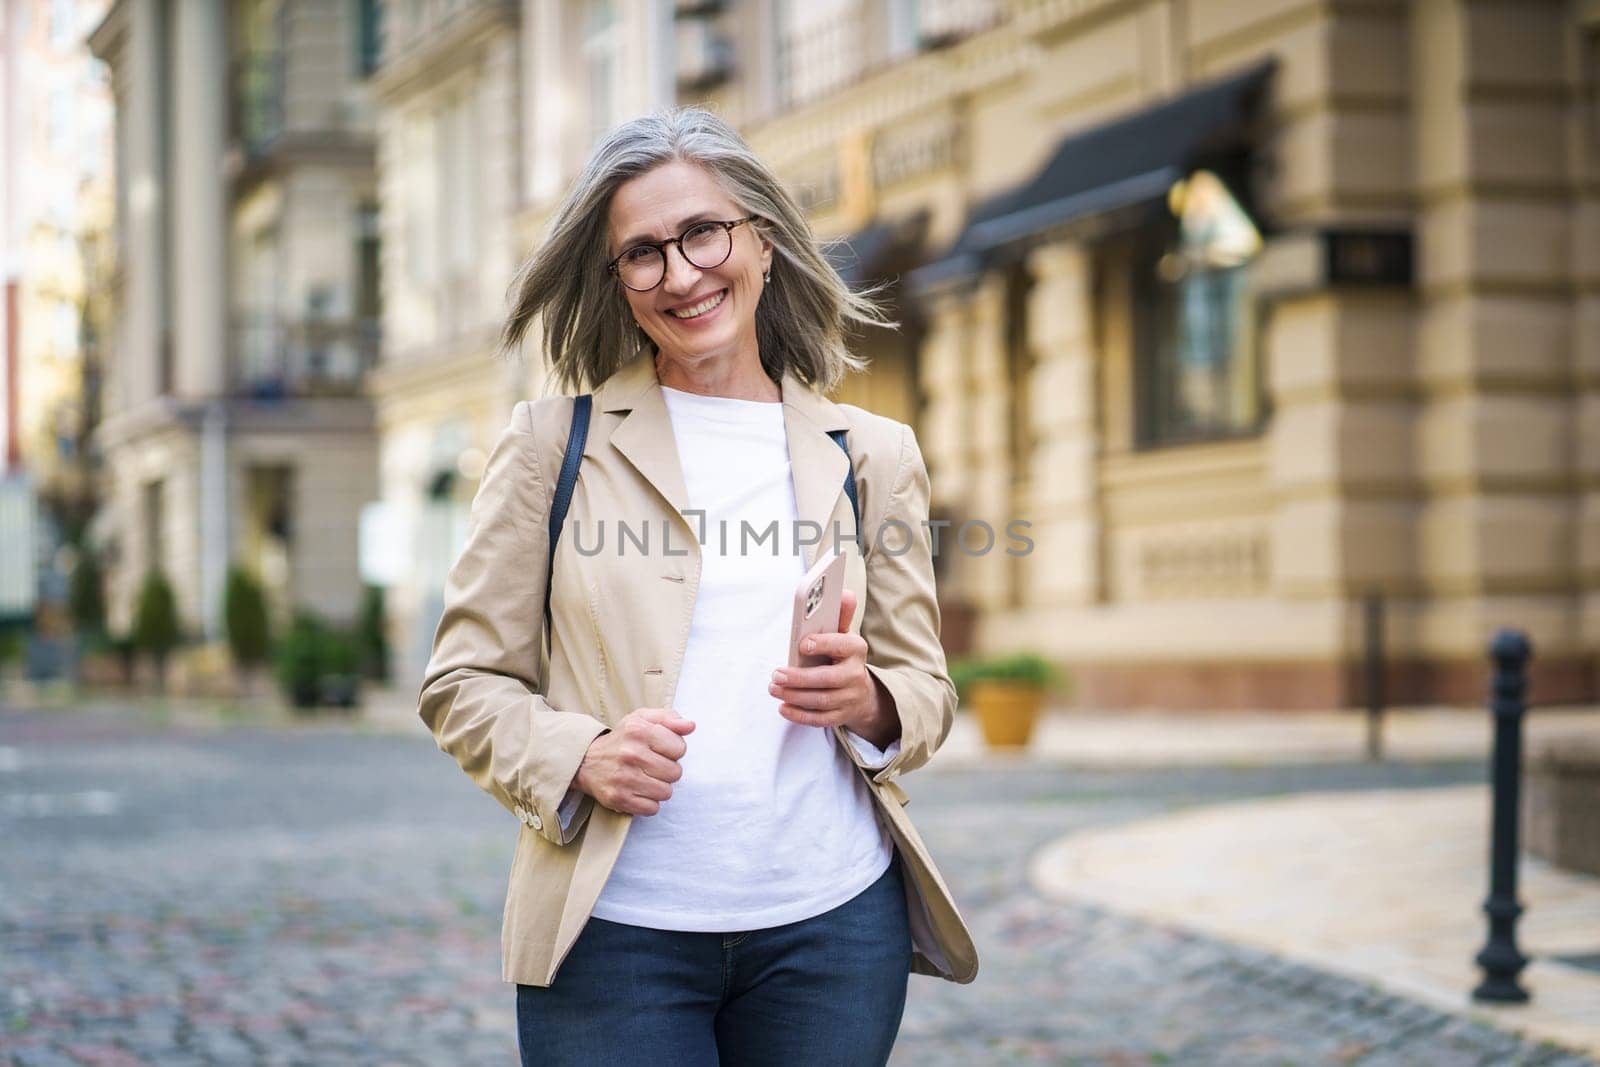 Joyful mature woman holds her phone while standing in old European city. This image captures the concept of happiness in the elderly. High quality photo